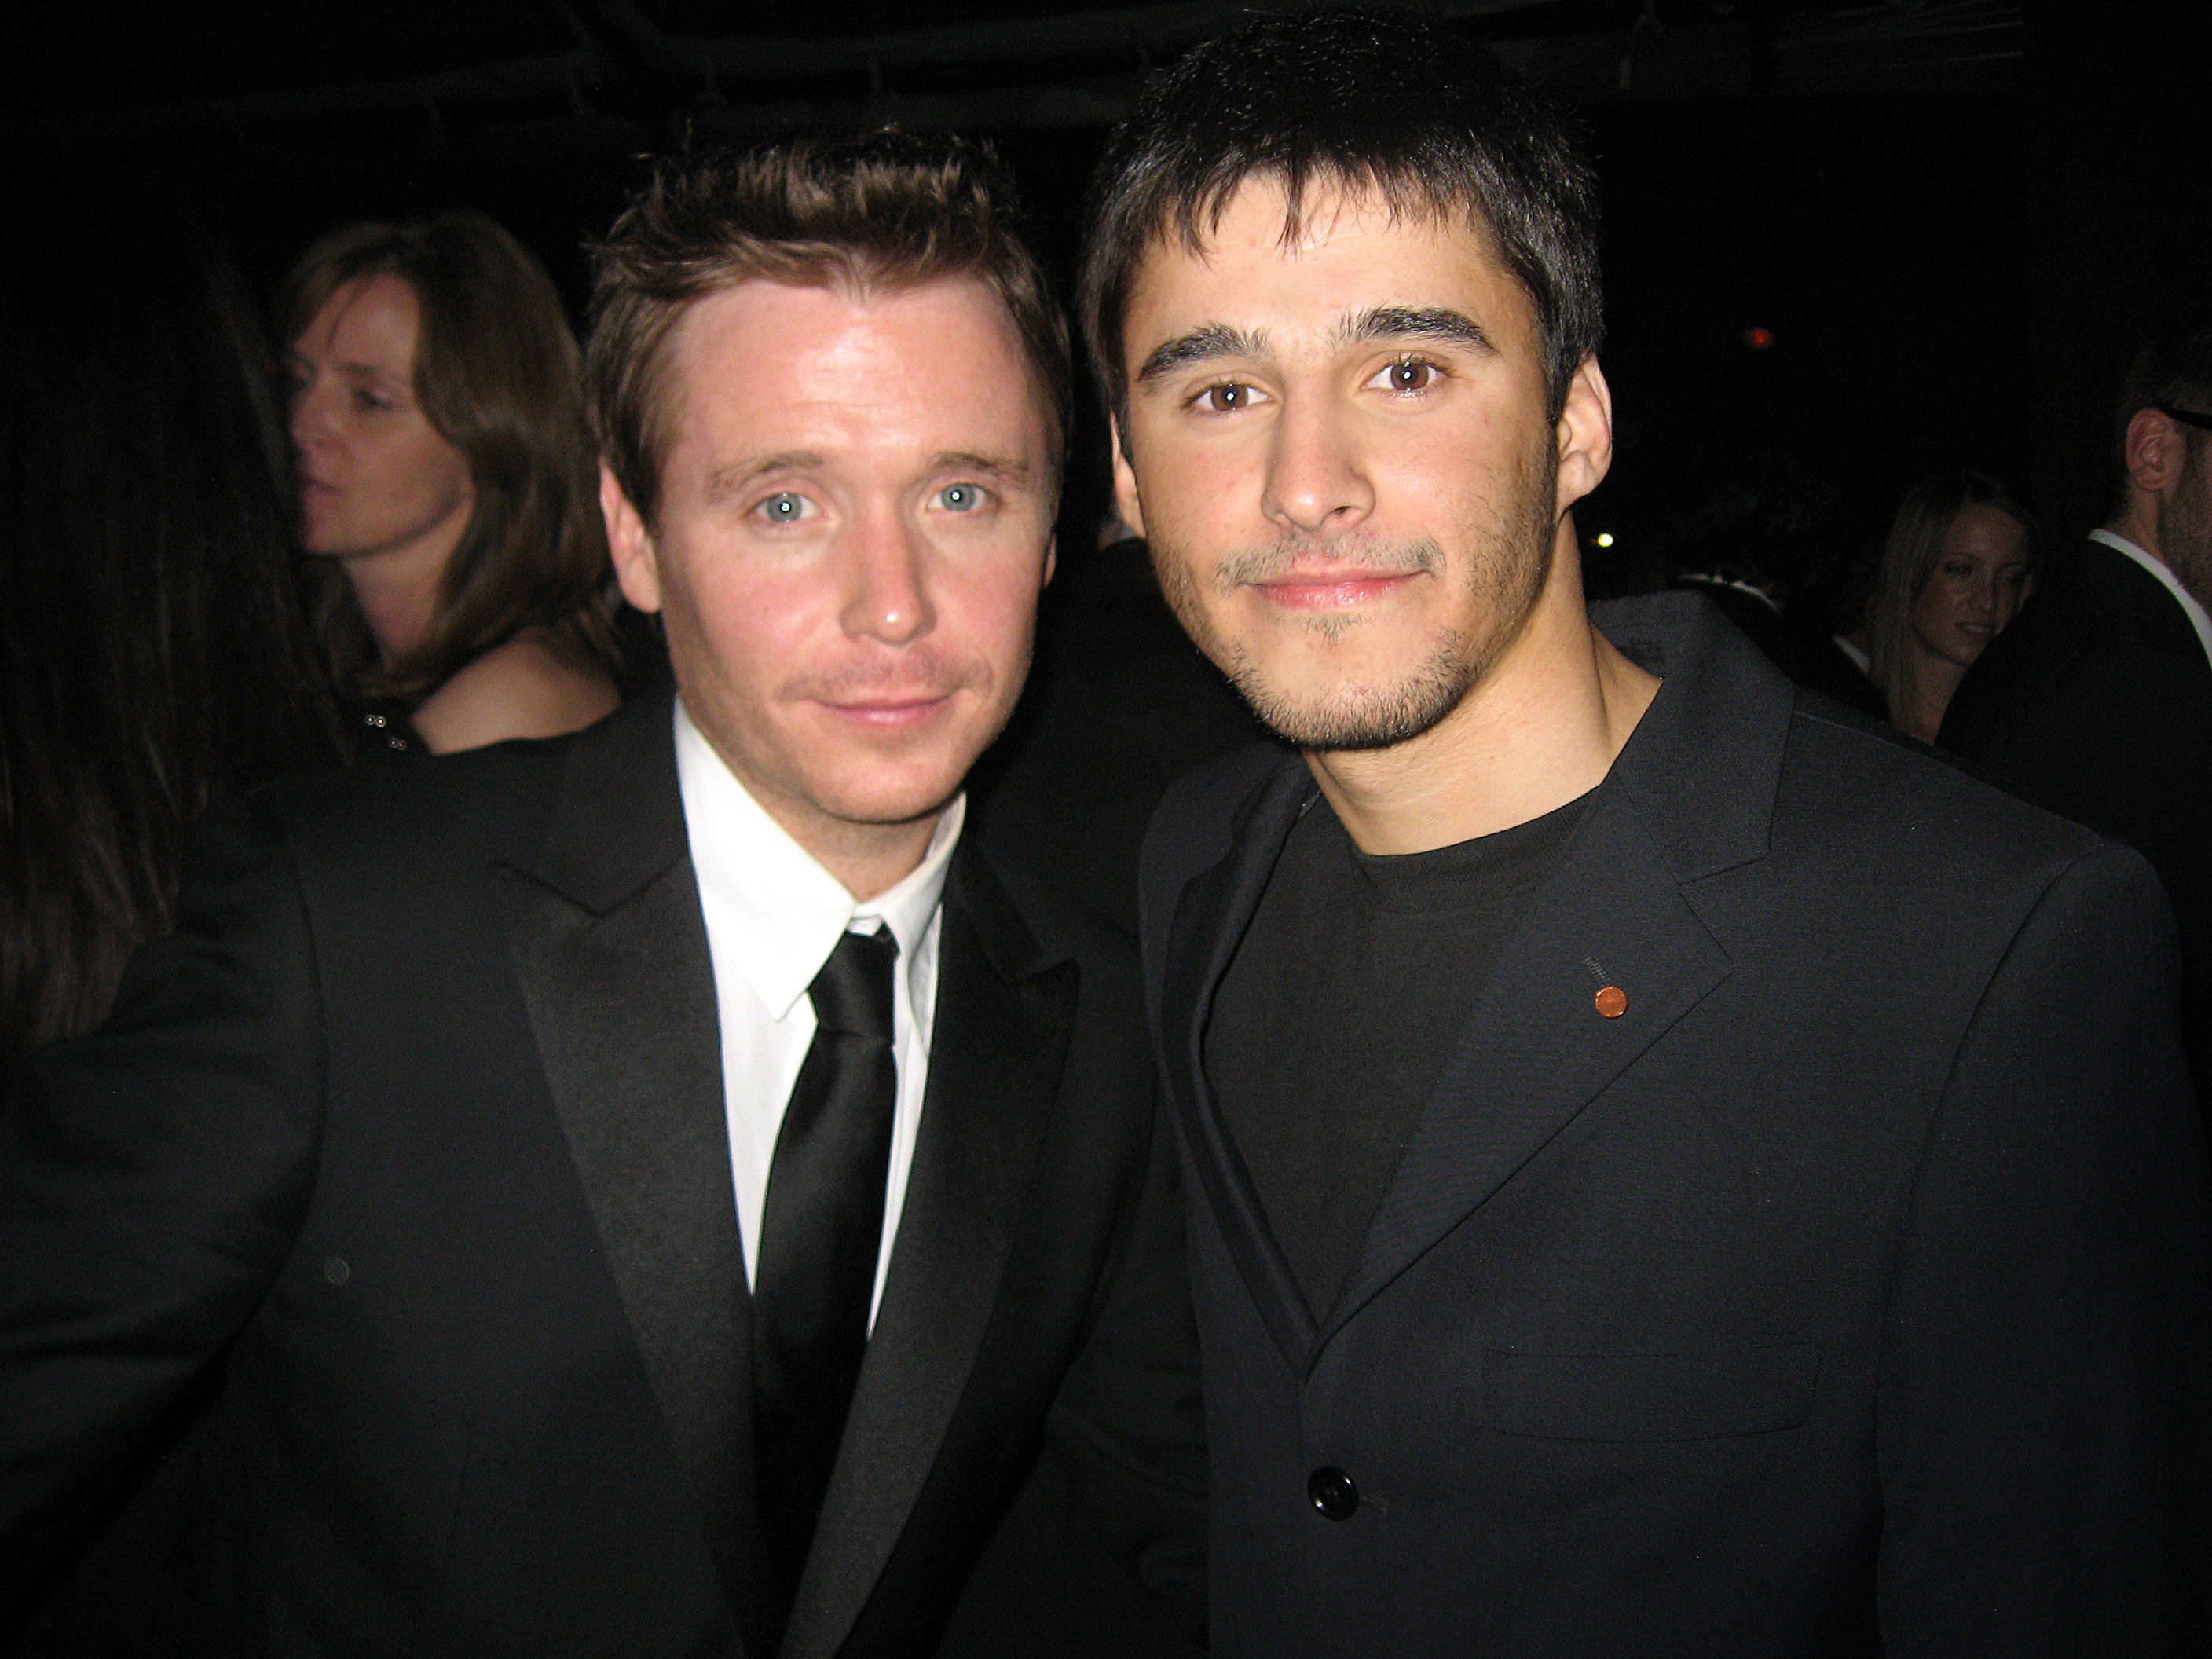 Actor Kevin Connolly (L) and producer Josh Wood (R) attend the 15th Annual Screen Actors Guild Awards at the Shrine Auditorium on January 25, 2009 in Los Angeles, California.